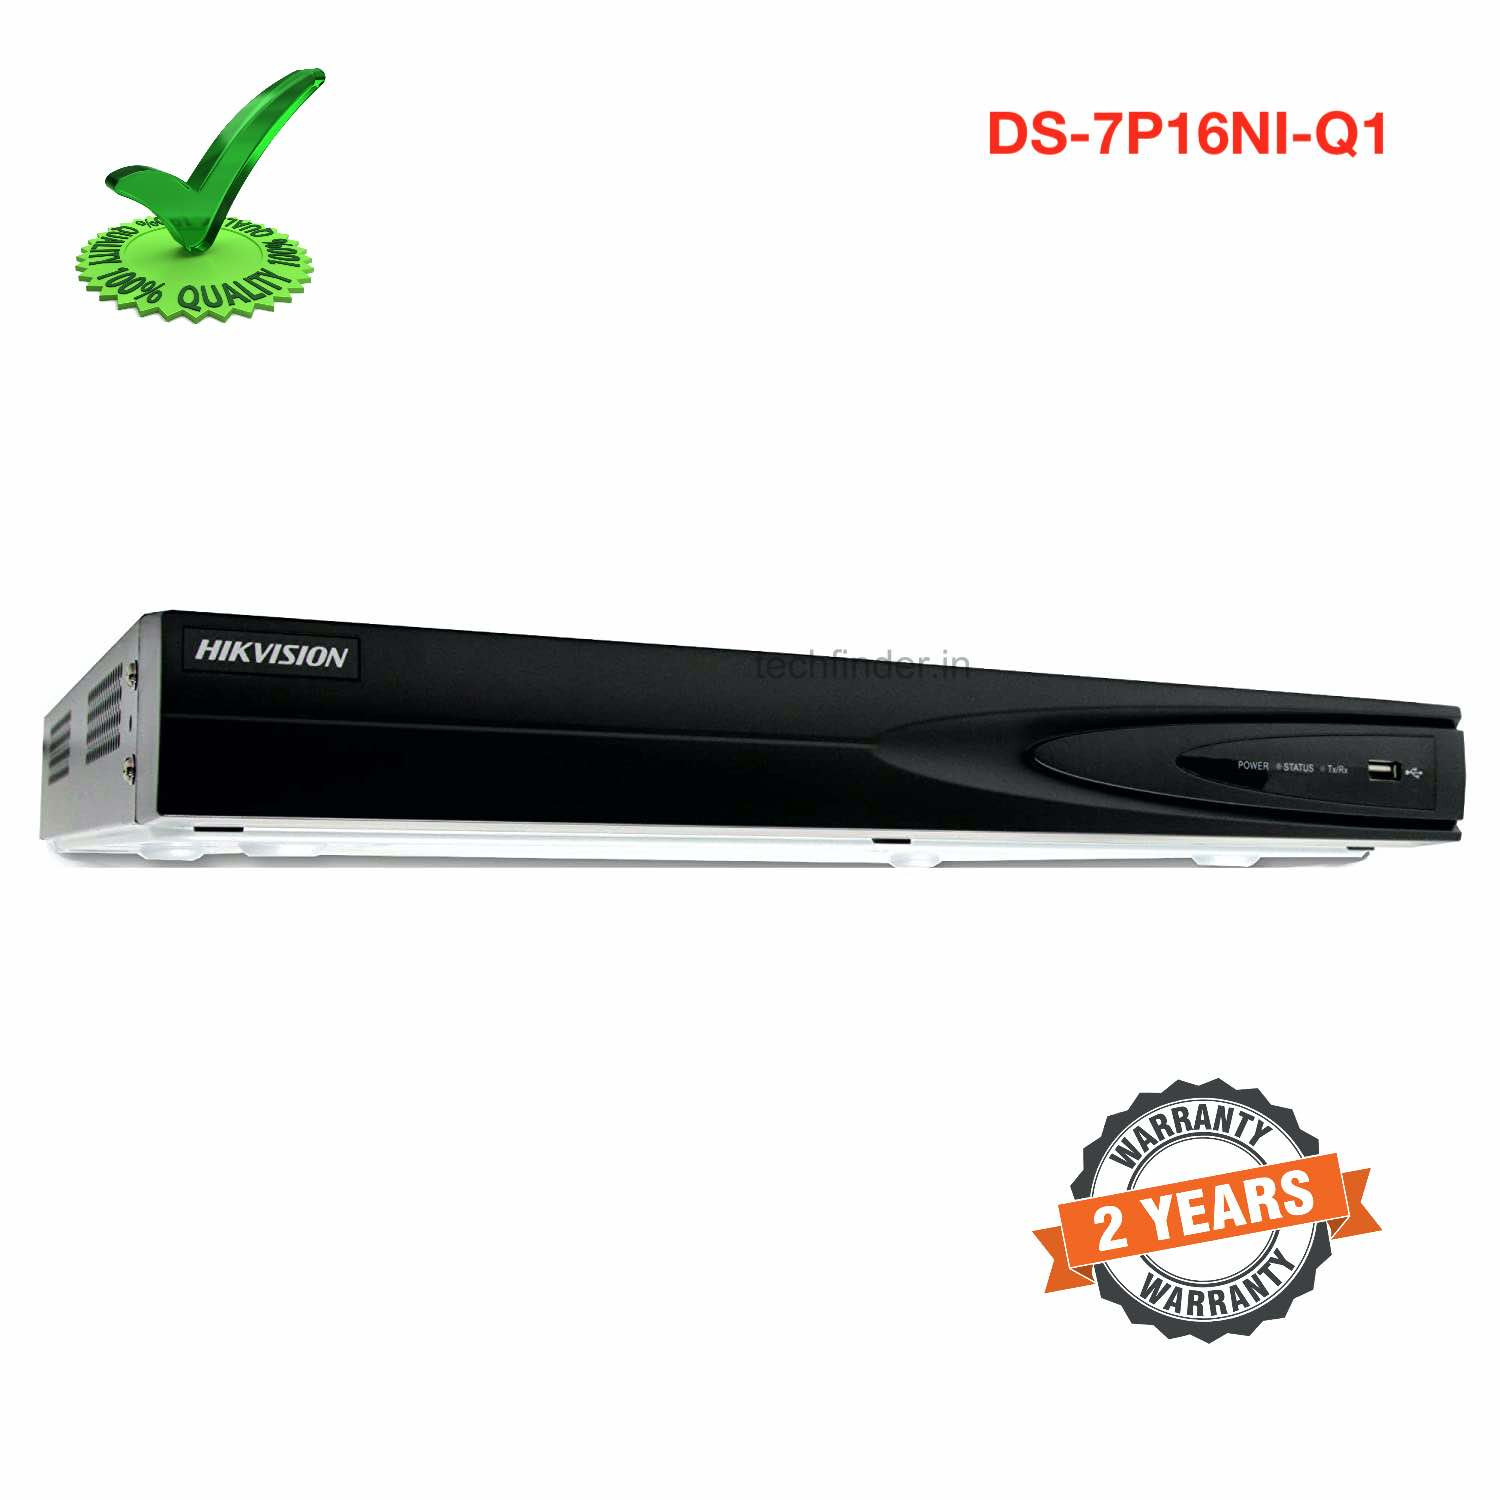 Hikvision DS-7P16NI-Q1 Hdmi 16ch 4k Nvr